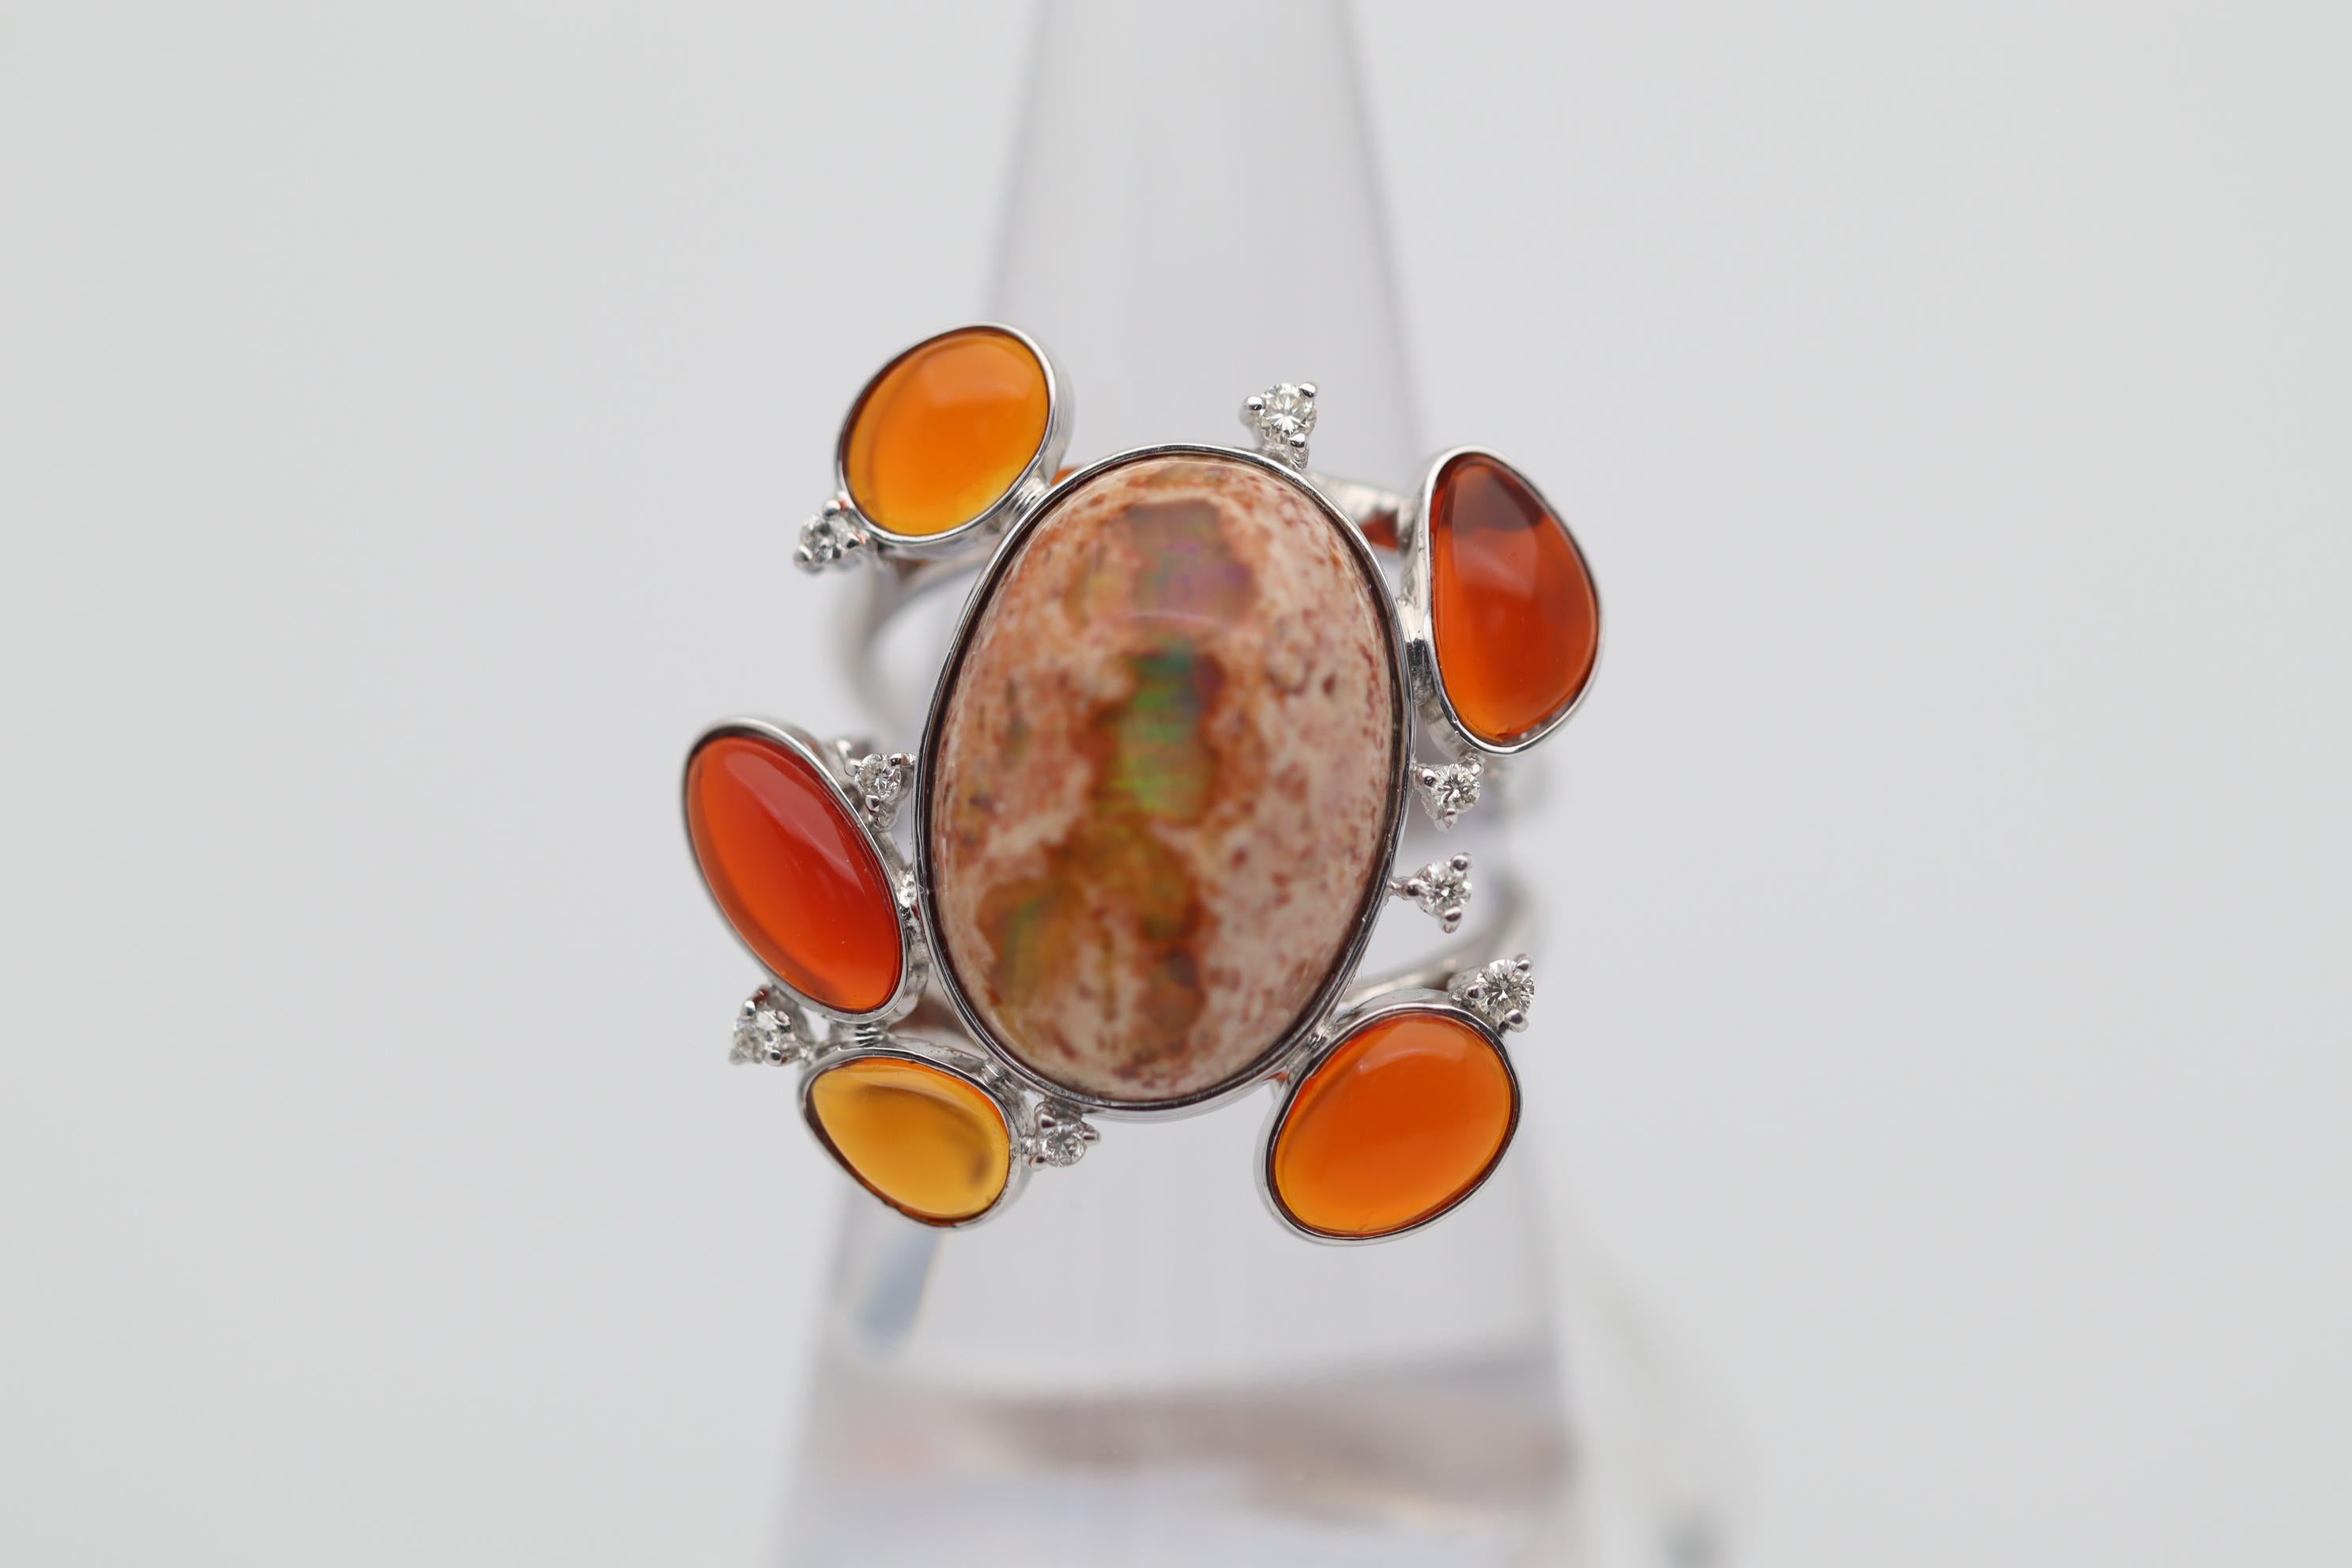 A unique, fun, and stylish ring featuring lovely fire opals! The largest opal in the center weighs 8.50 carats and is still in its original matrix for an added look. Around the center opal are 5 vivid orange/red fire opals weighing a total of 2.46